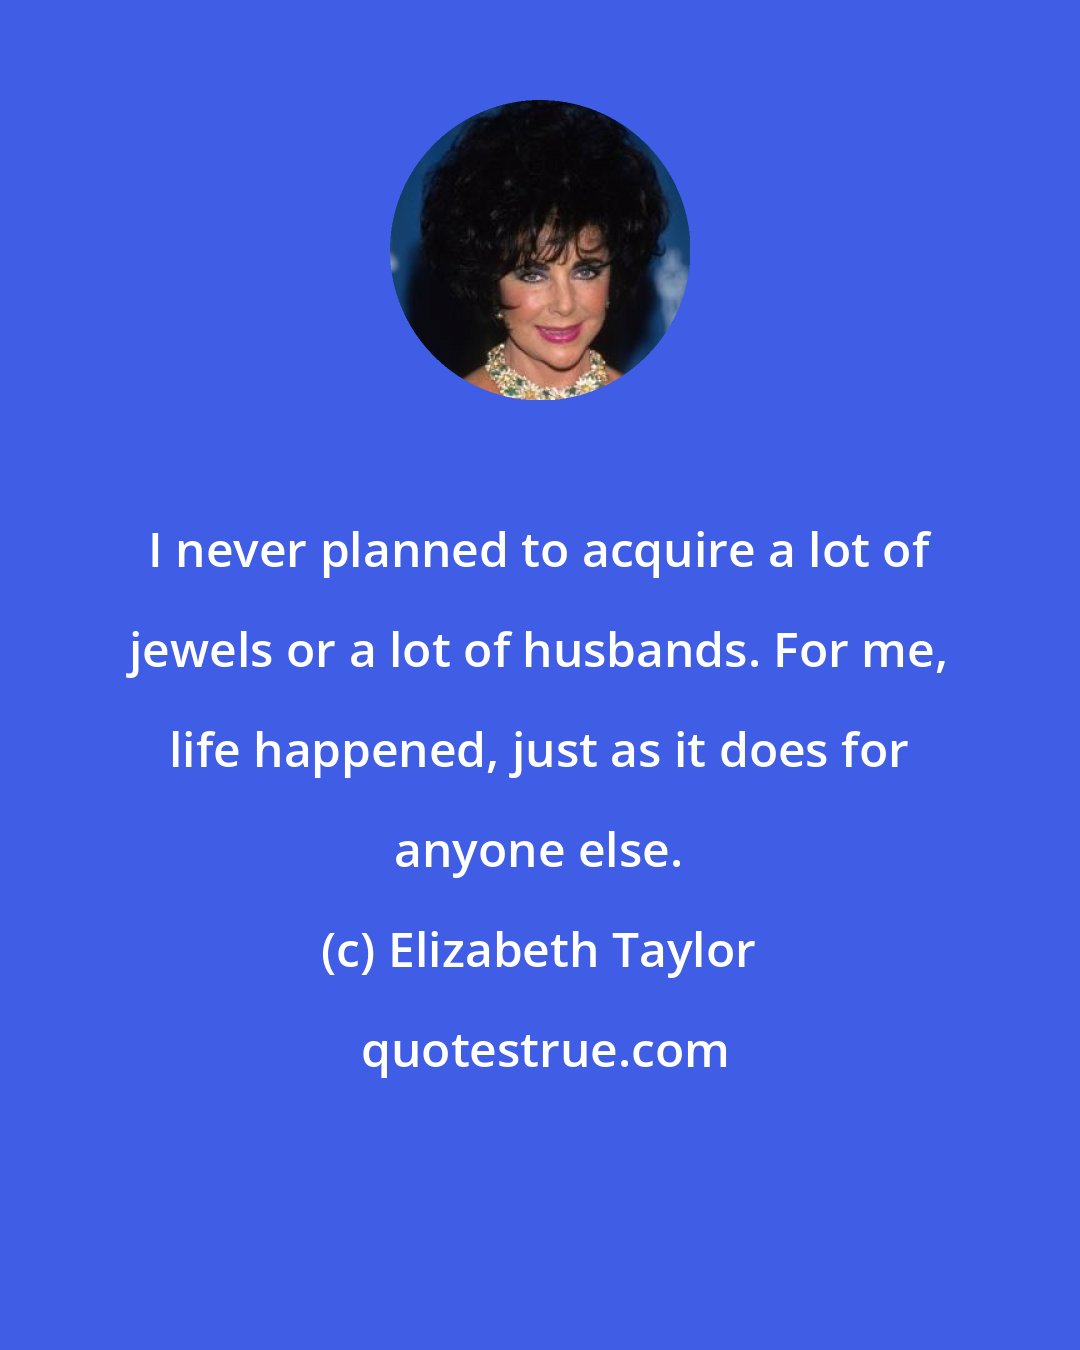 Elizabeth Taylor: I never planned to acquire a lot of jewels or a lot of husbands. For me, life happened, just as it does for anyone else.